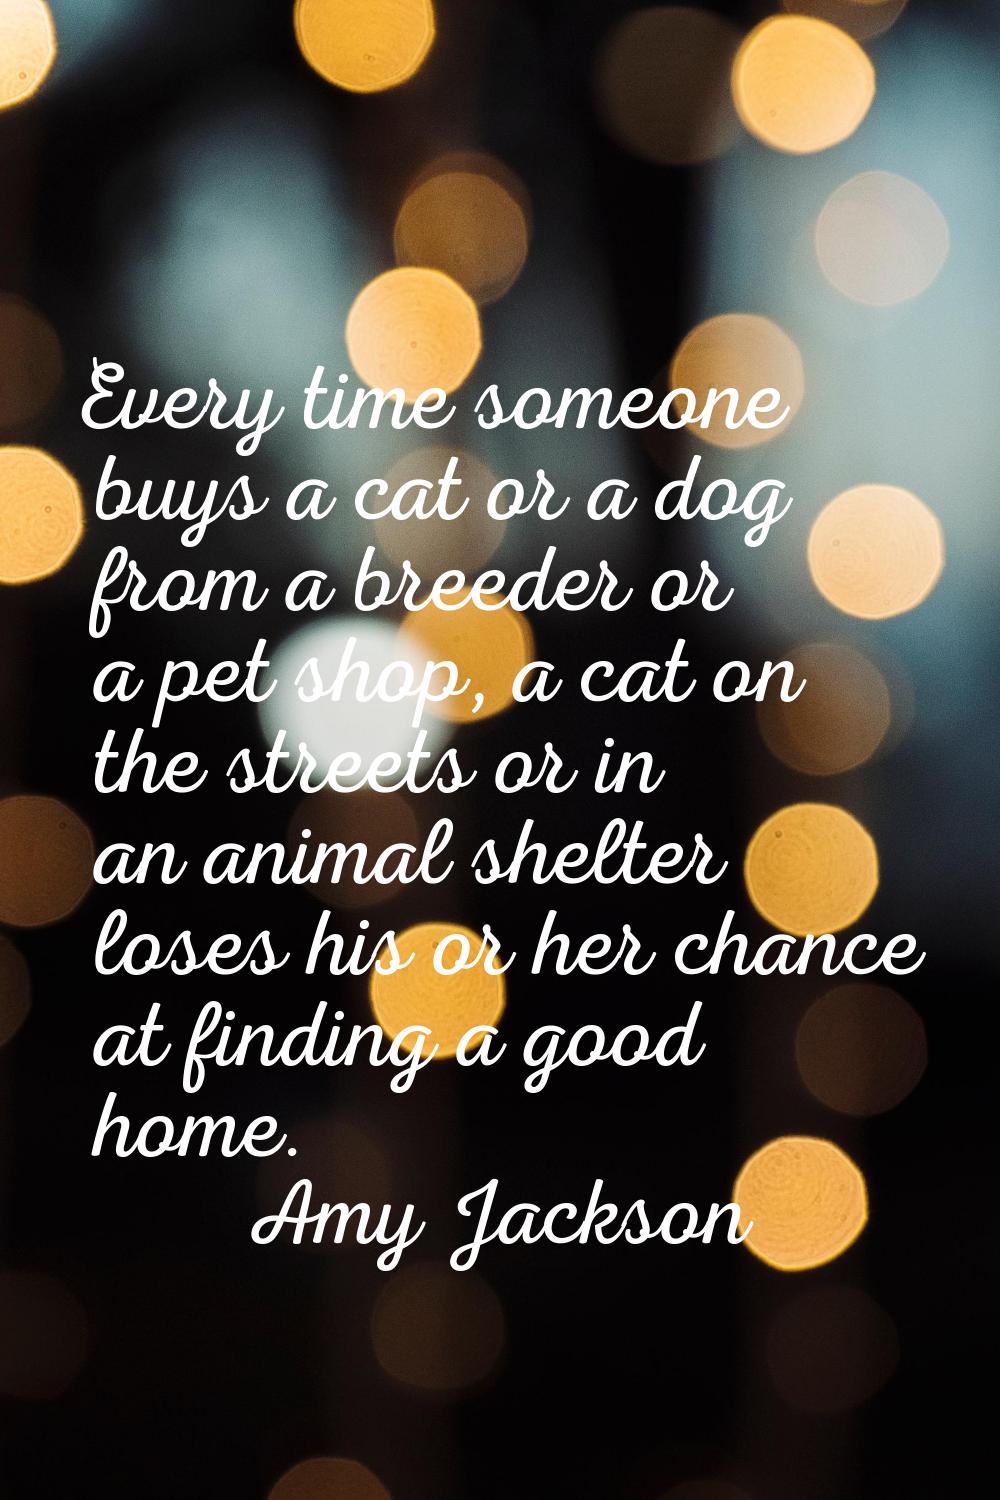 Every time someone buys a cat or a dog from a breeder or a pet shop, a cat on the streets or in an 